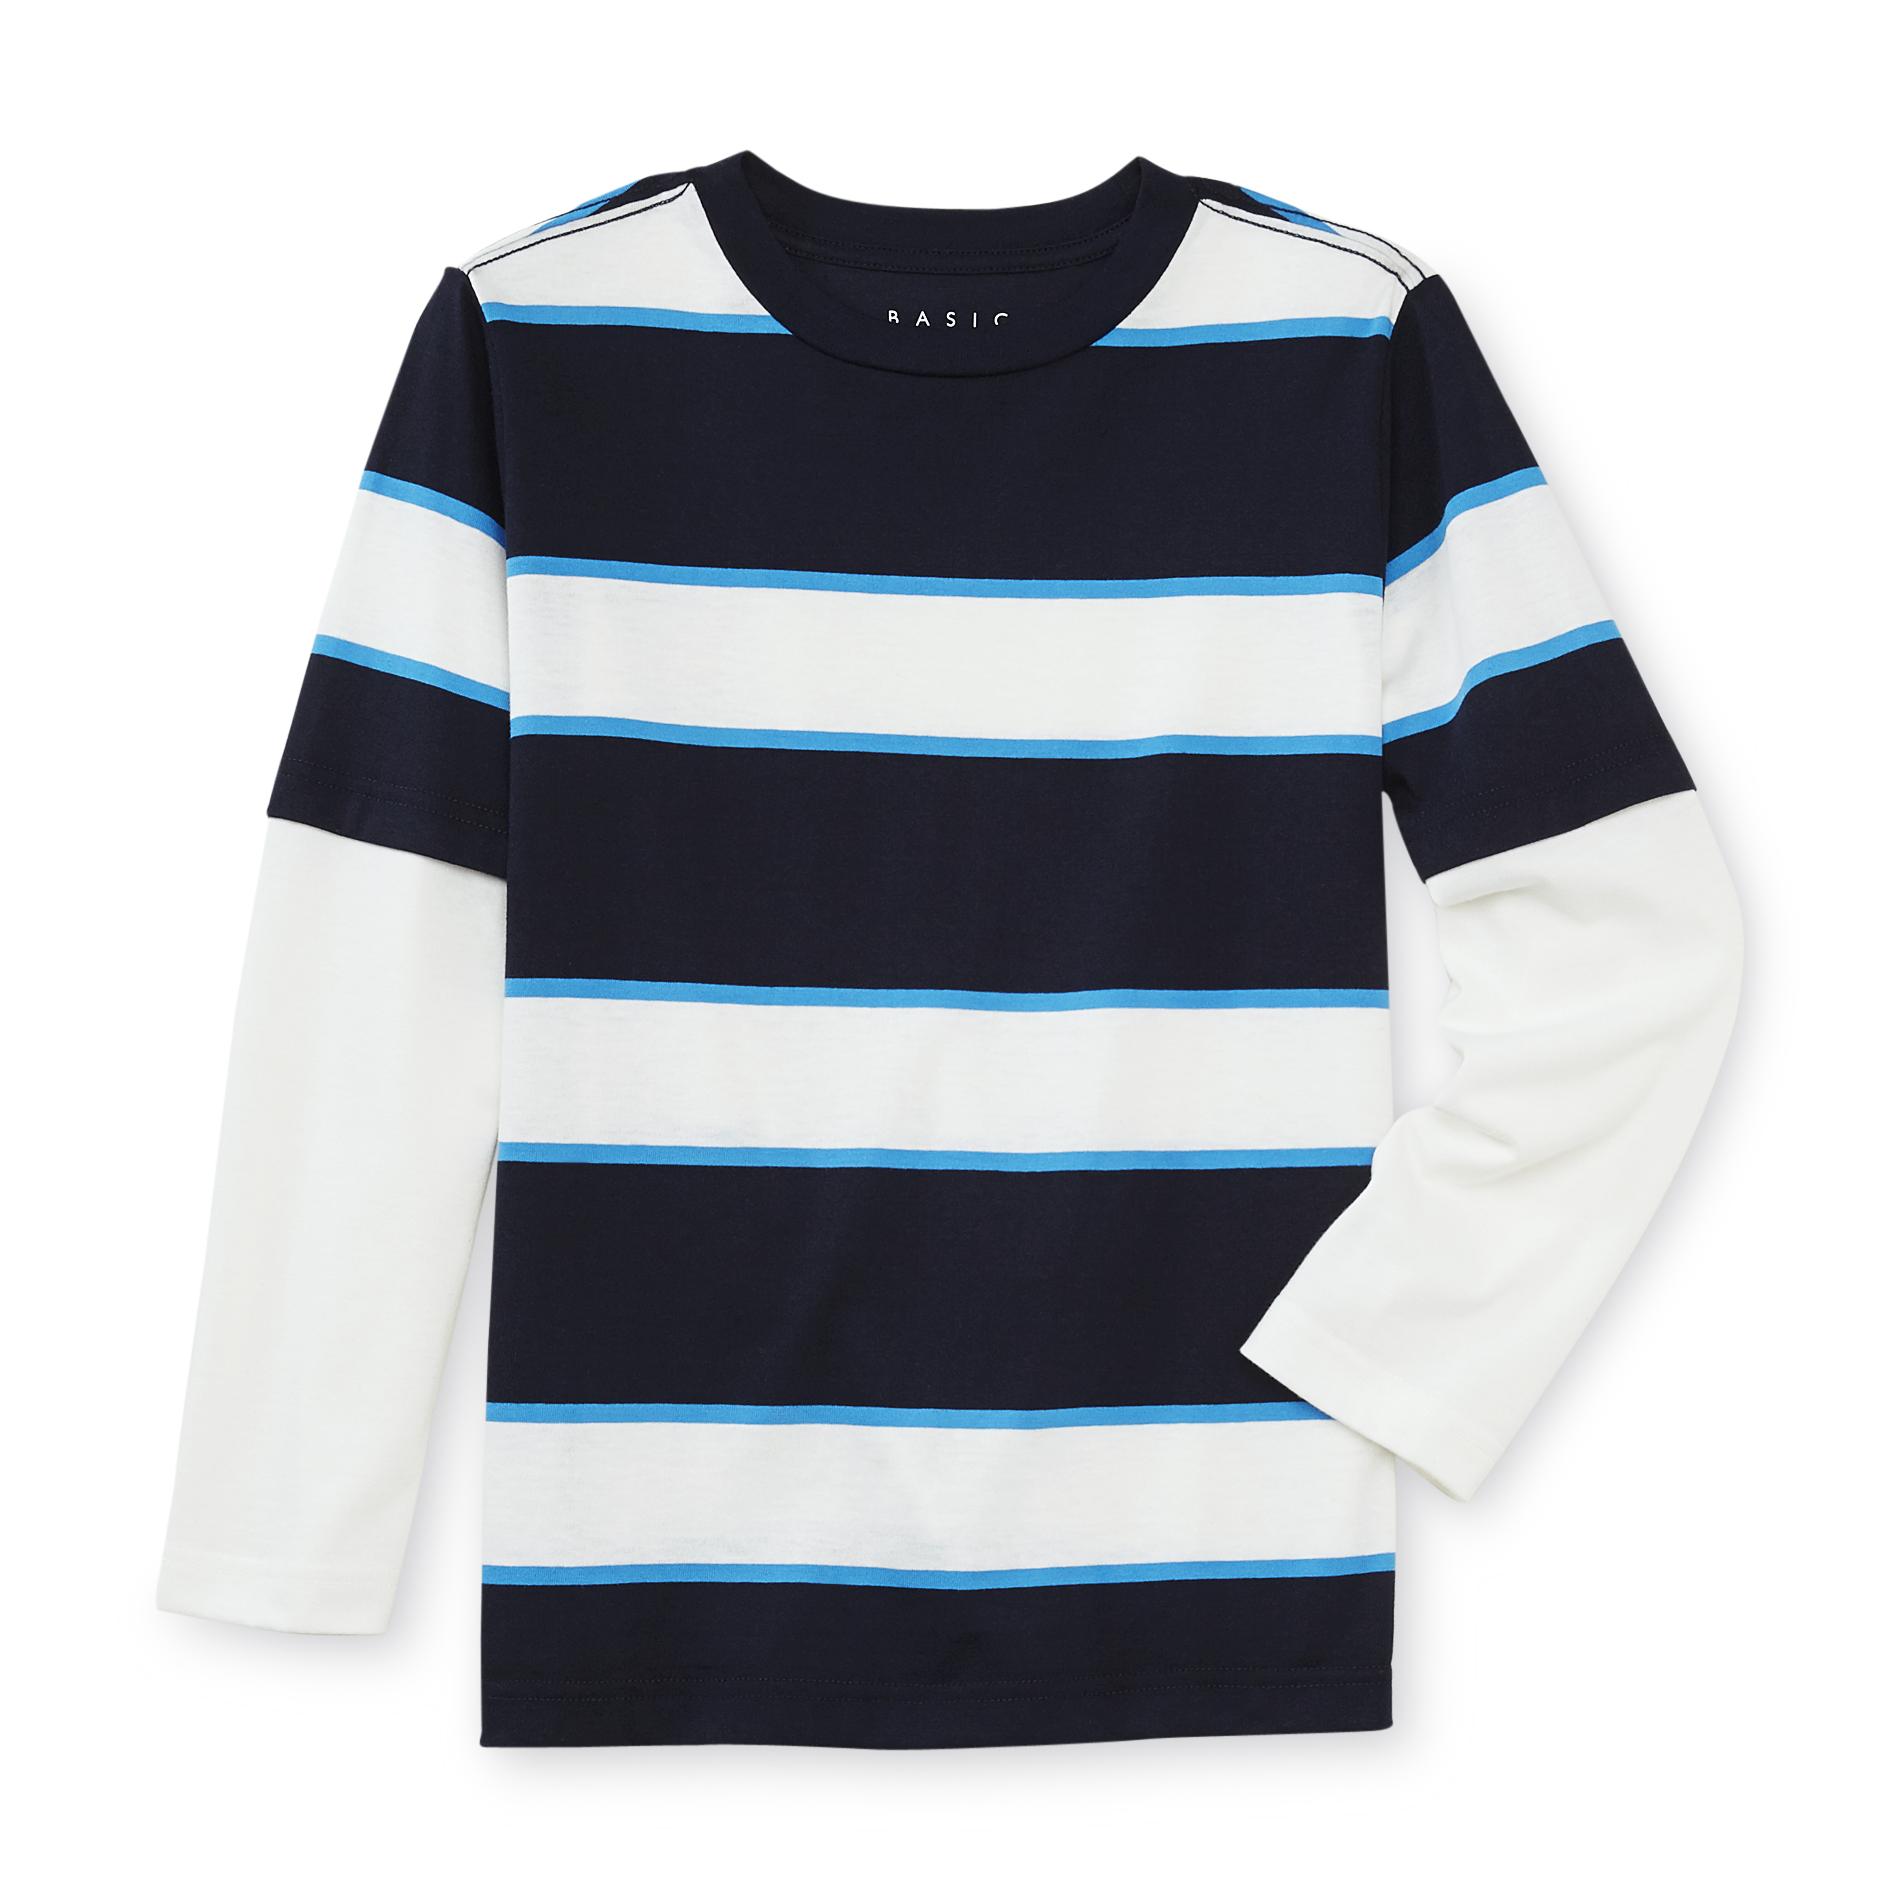 Basic Editions Boy's Layered-Look T-Shirt - Striped